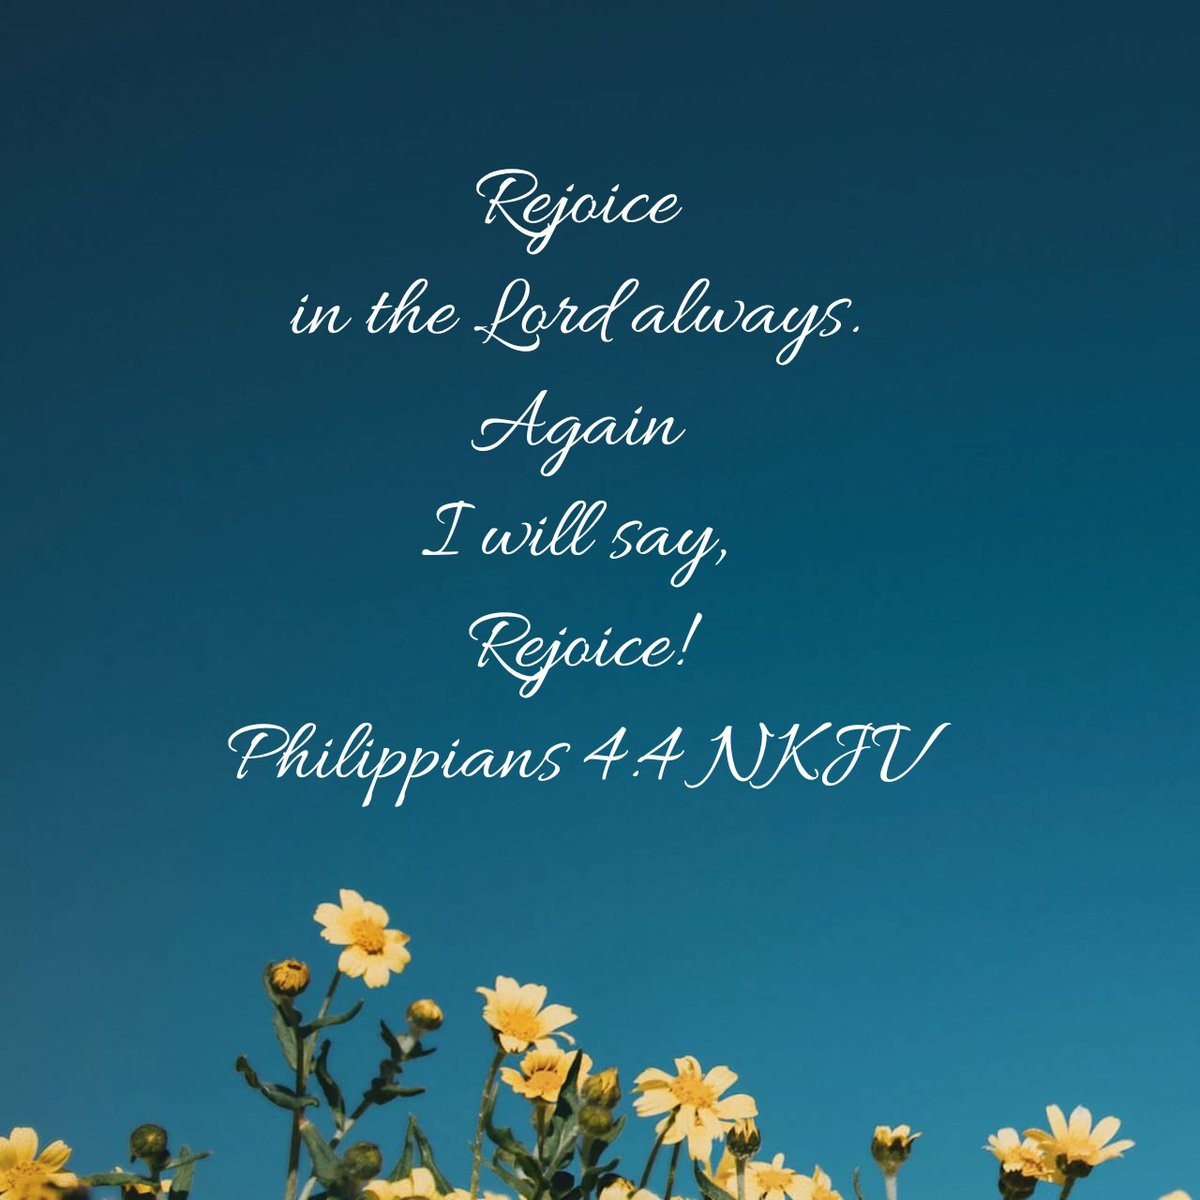 Rejoice! And be exceedingly glad!

'Rejoice' means to have 'joy' again. With the God of the Bible we have many reasons to have joy and to have joy again. 

Philippians 4:4 NKJV
Rejoice in the Lord always. Again I will say, rejoice!
   
#mannaintheword